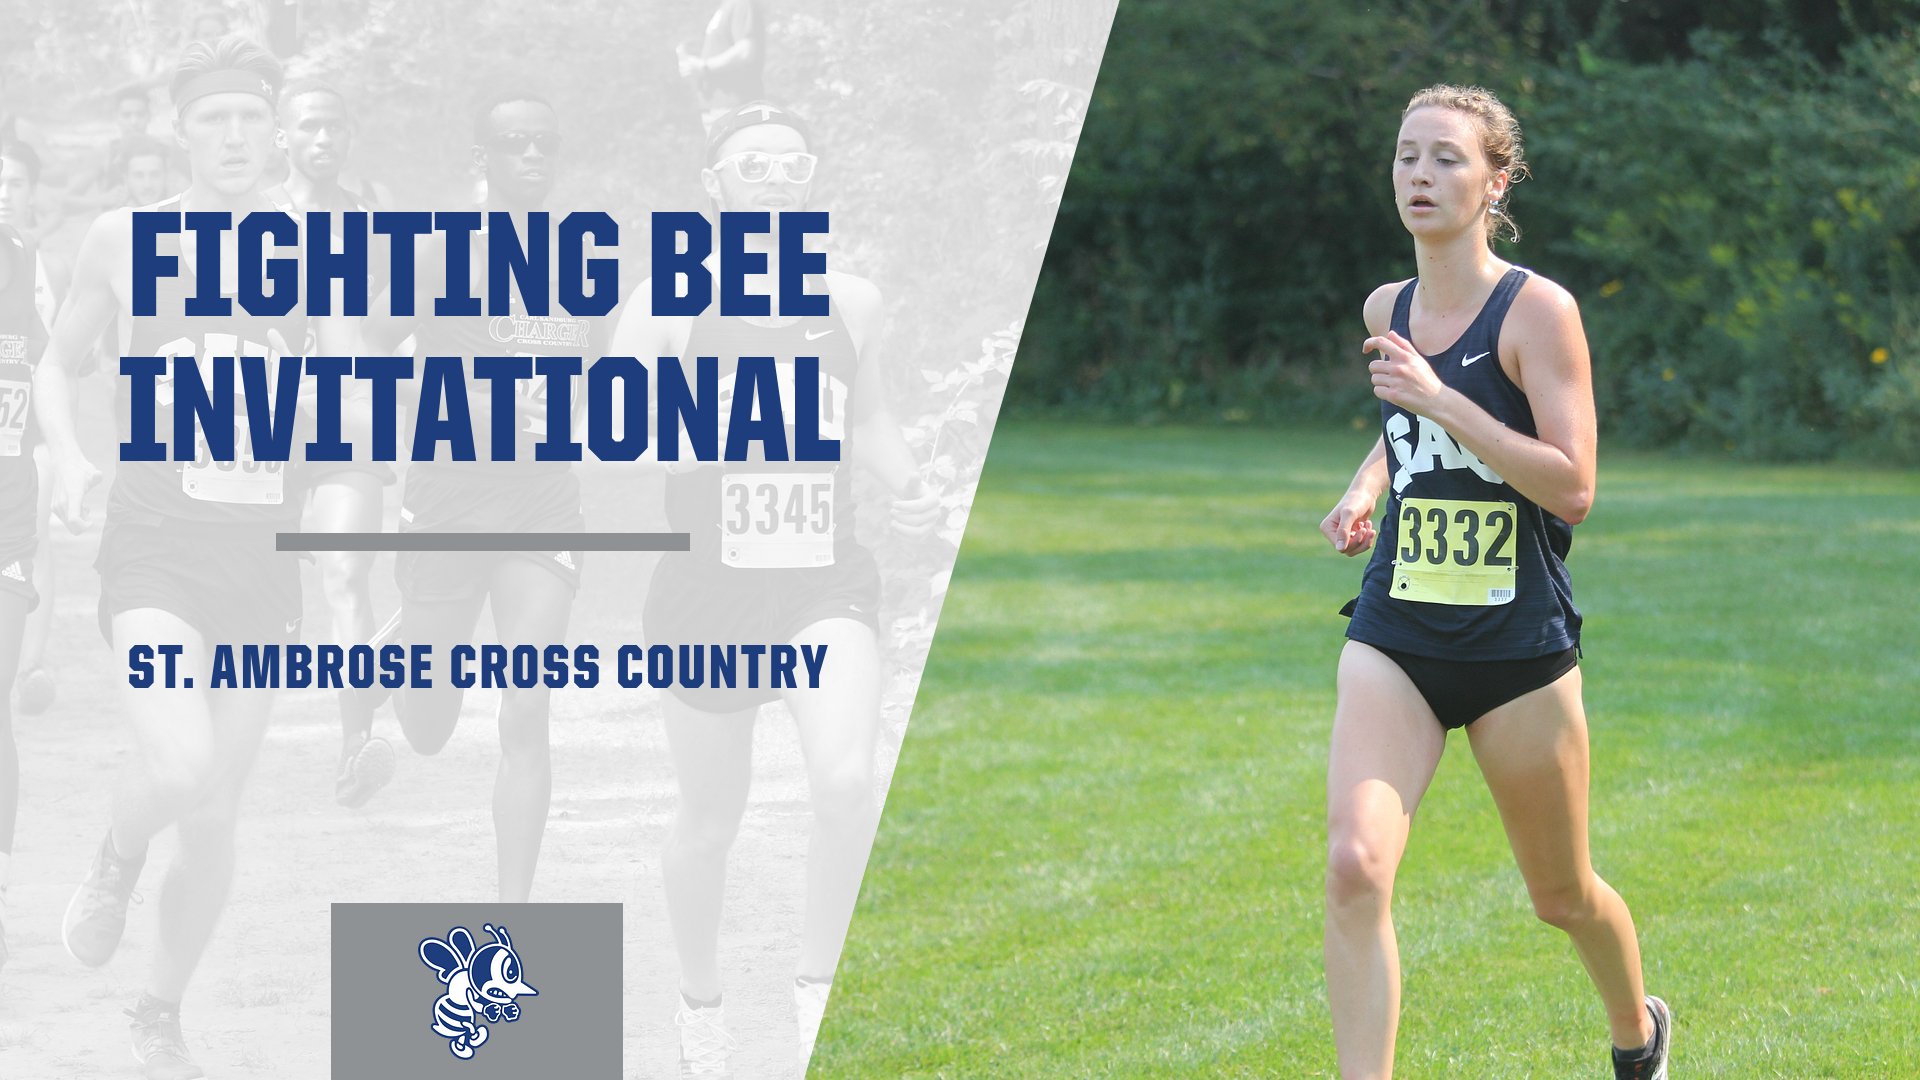 Bees set the bar high at Fighting Bee Invitational